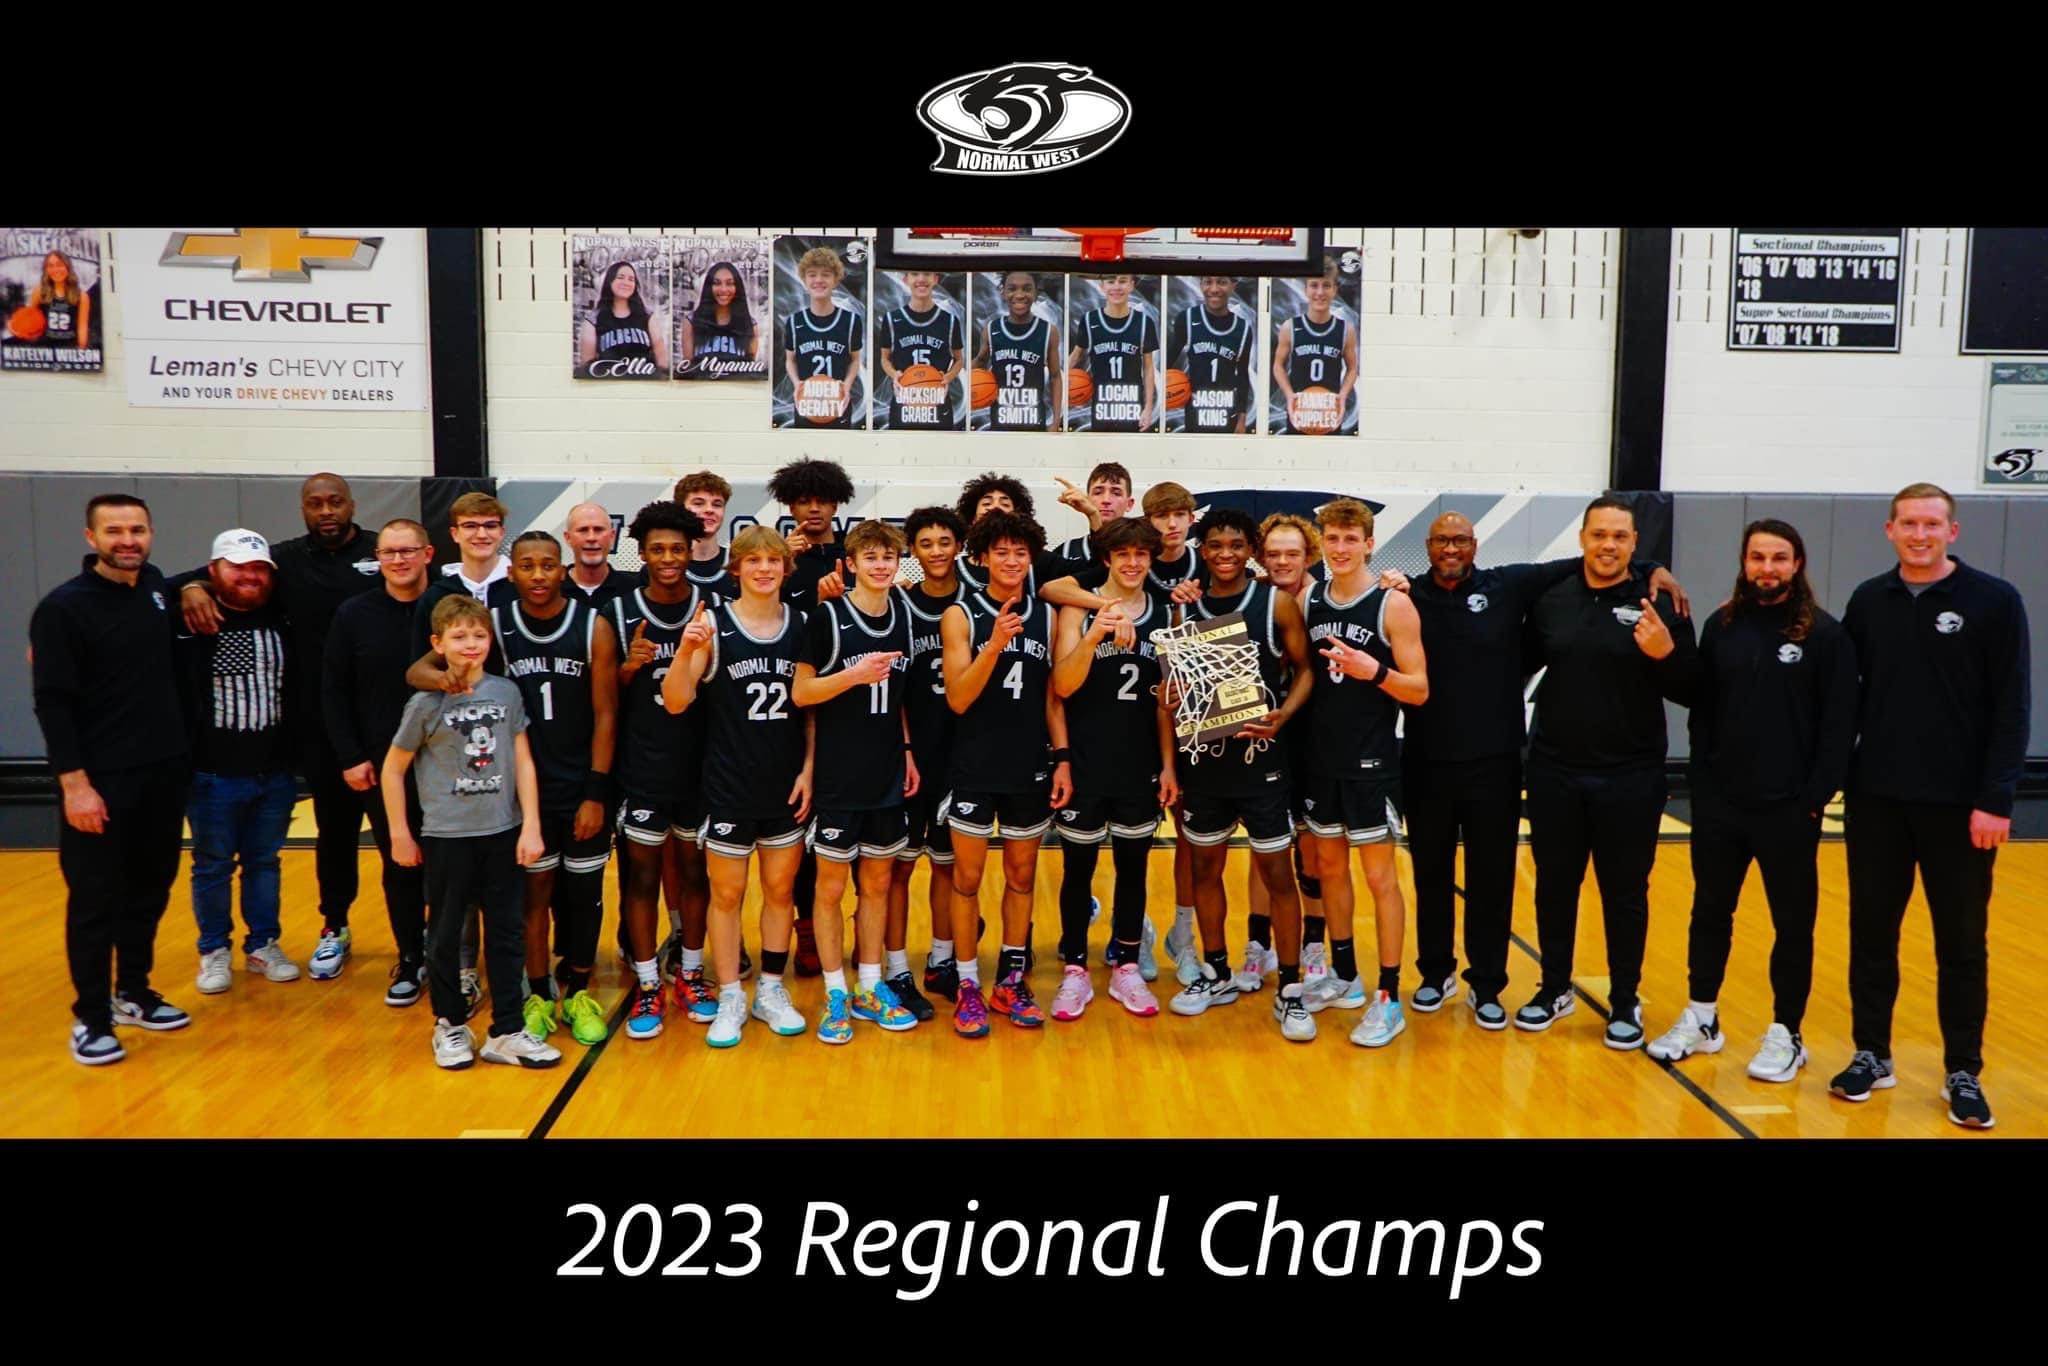 The 23-24 Wildcats are hoping to repeat their 2023 Regional Championship this season. Their season kicks off tonight at the Shirk Center for the 2023 Intercity Tournament.